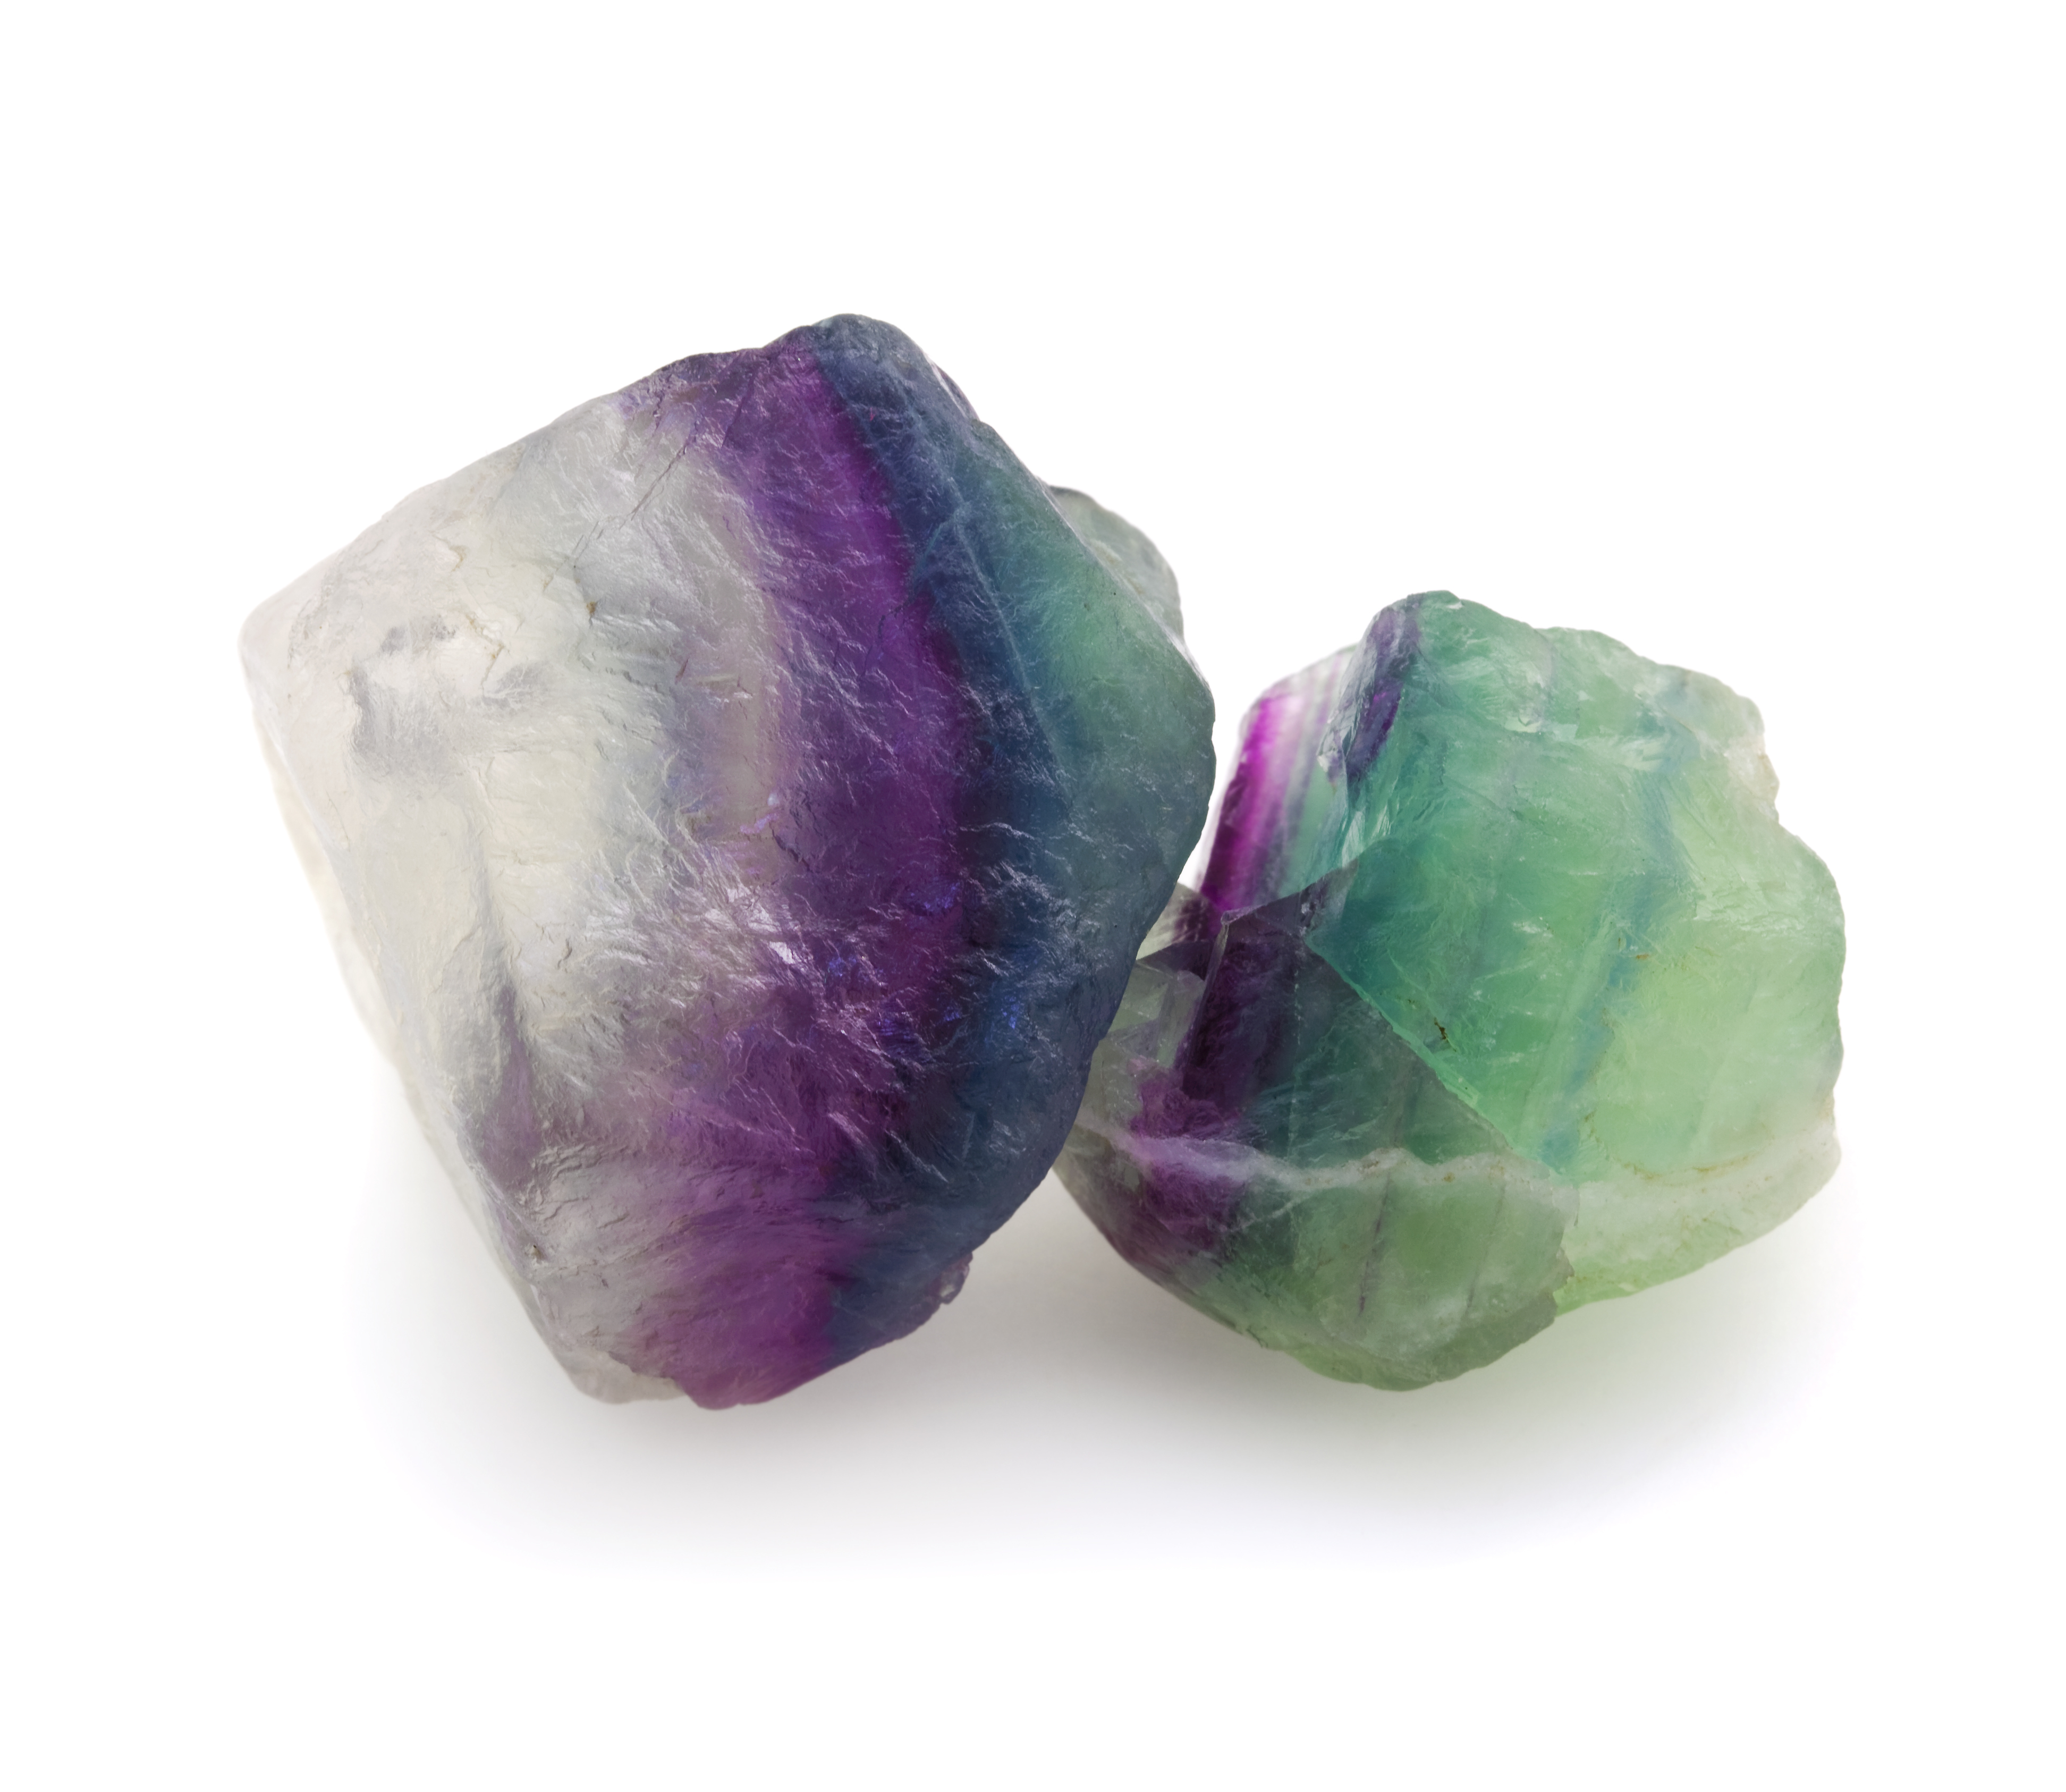 Two pieces of Fluorite on a white background